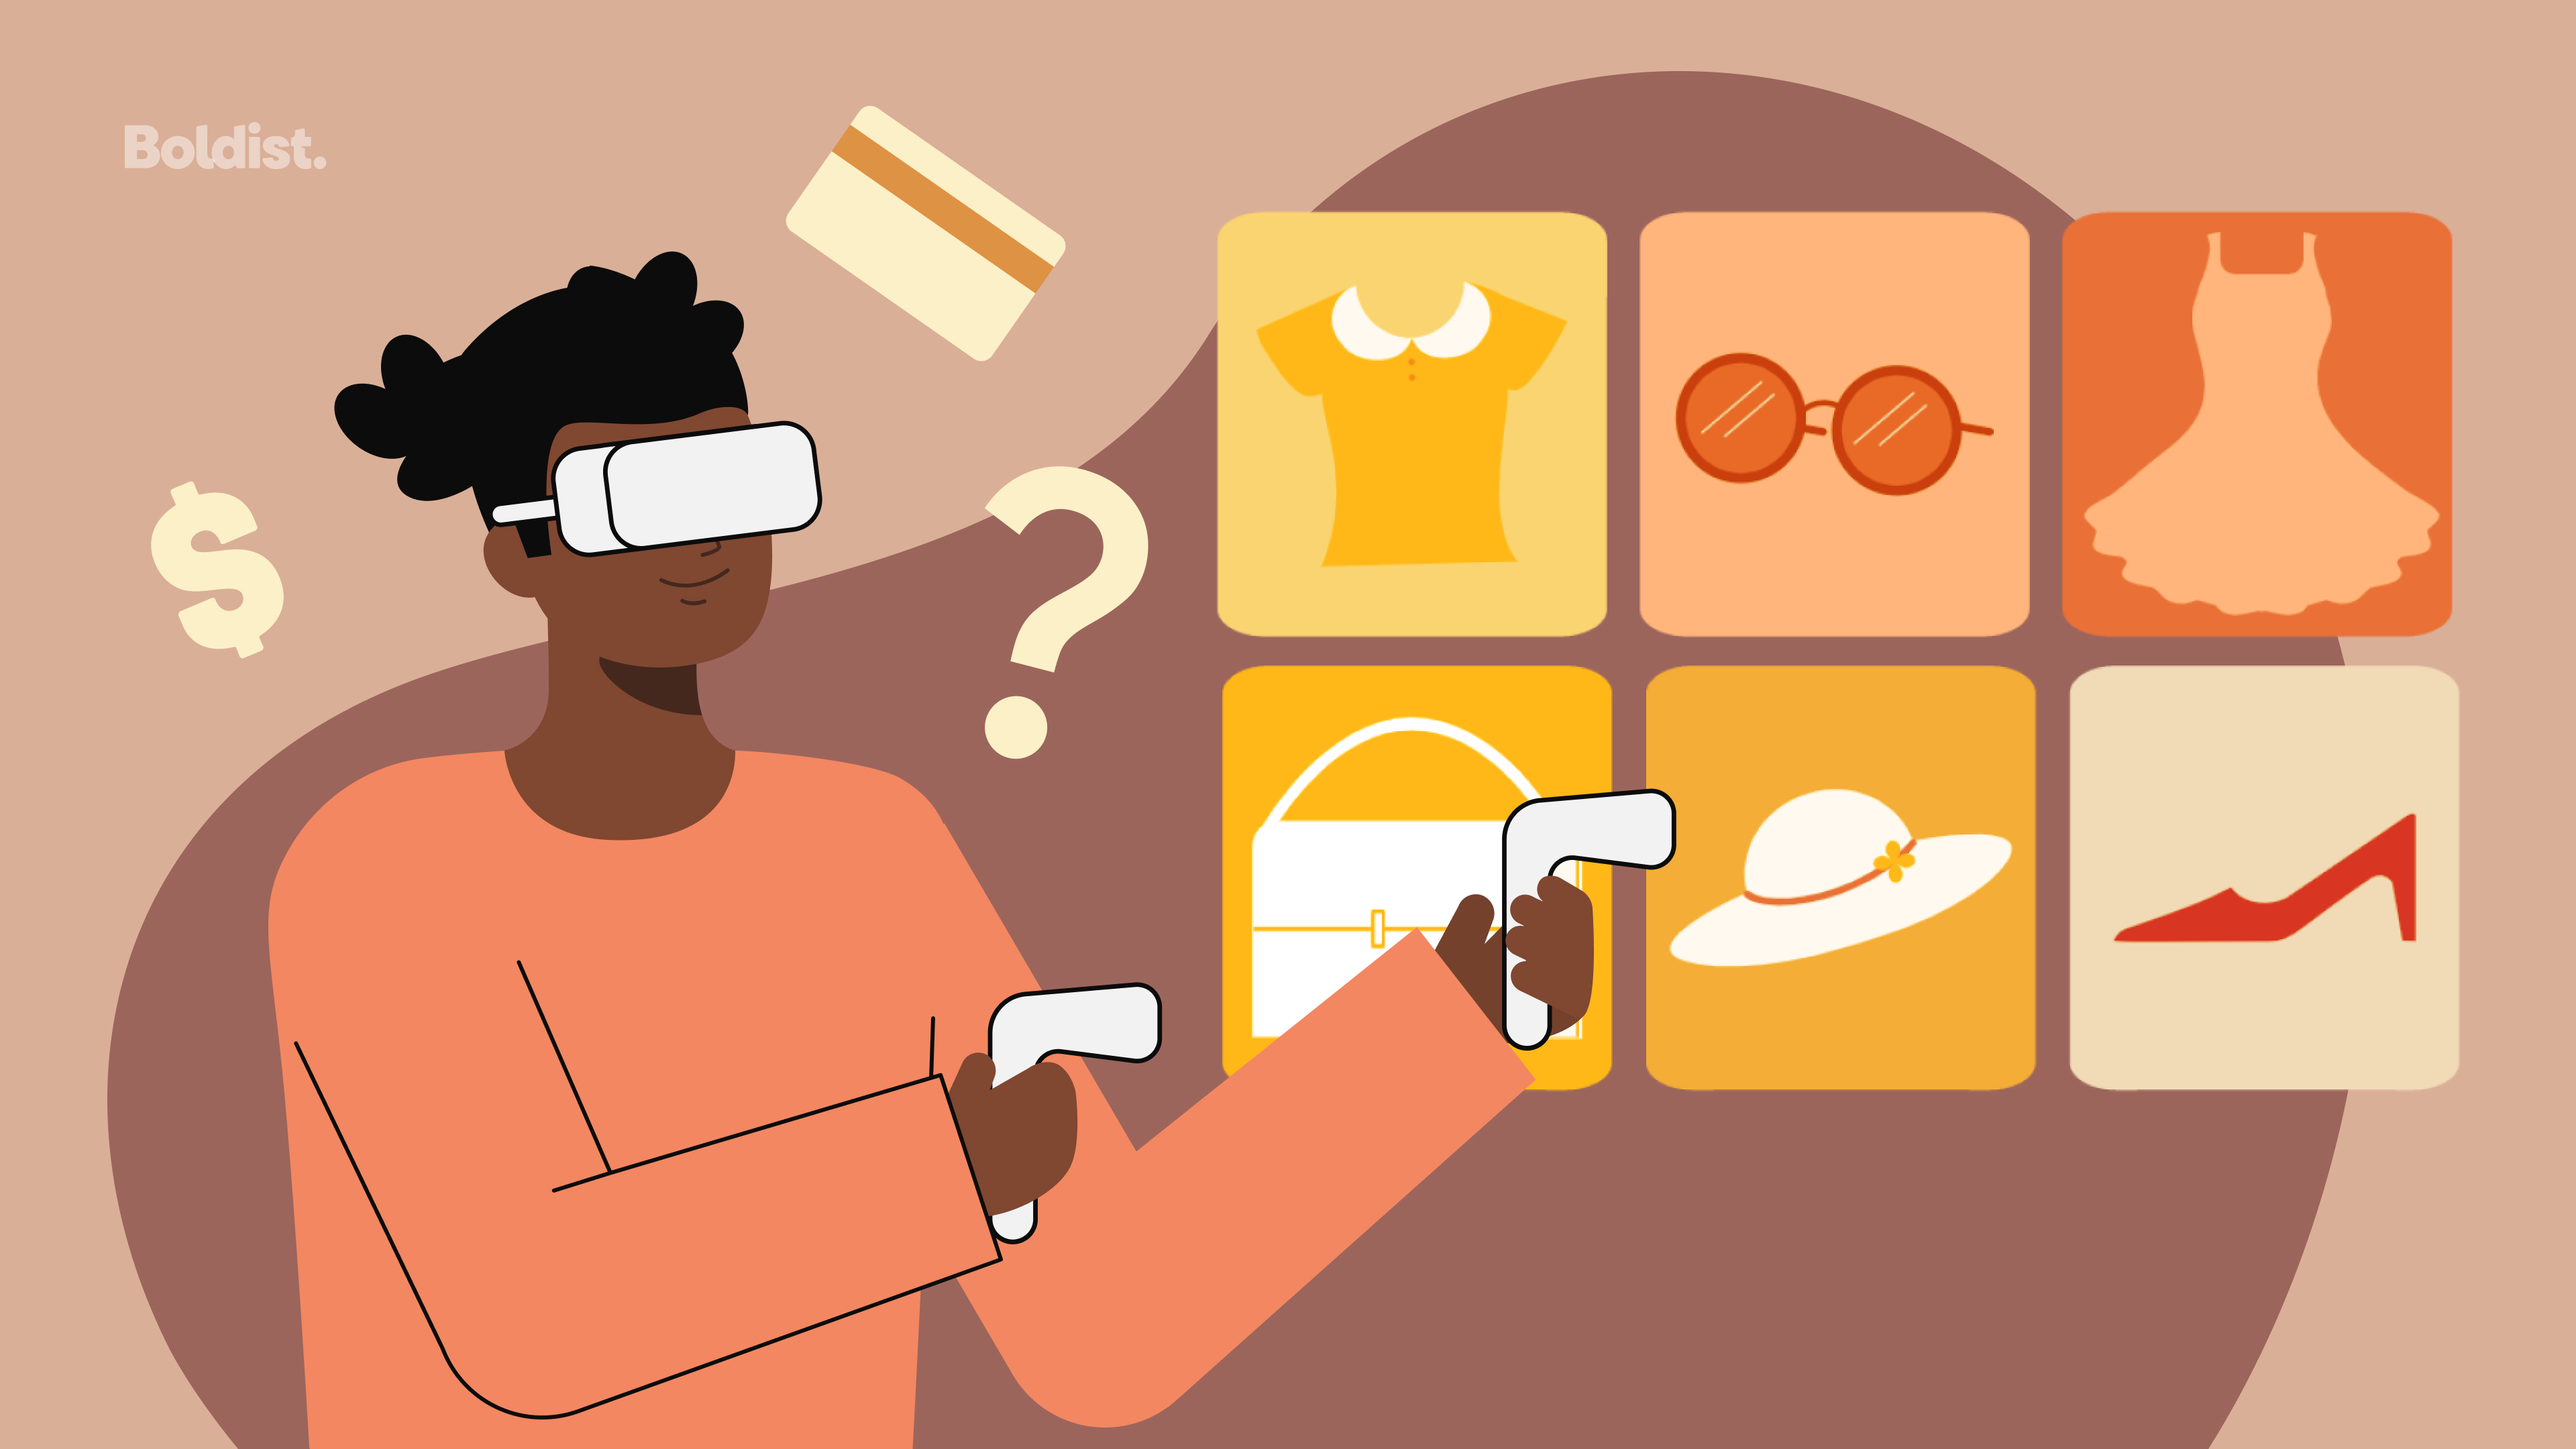 Boldist - Virtual Reality in Ecommerce Isn’t There Yet, But Keep It in Mind